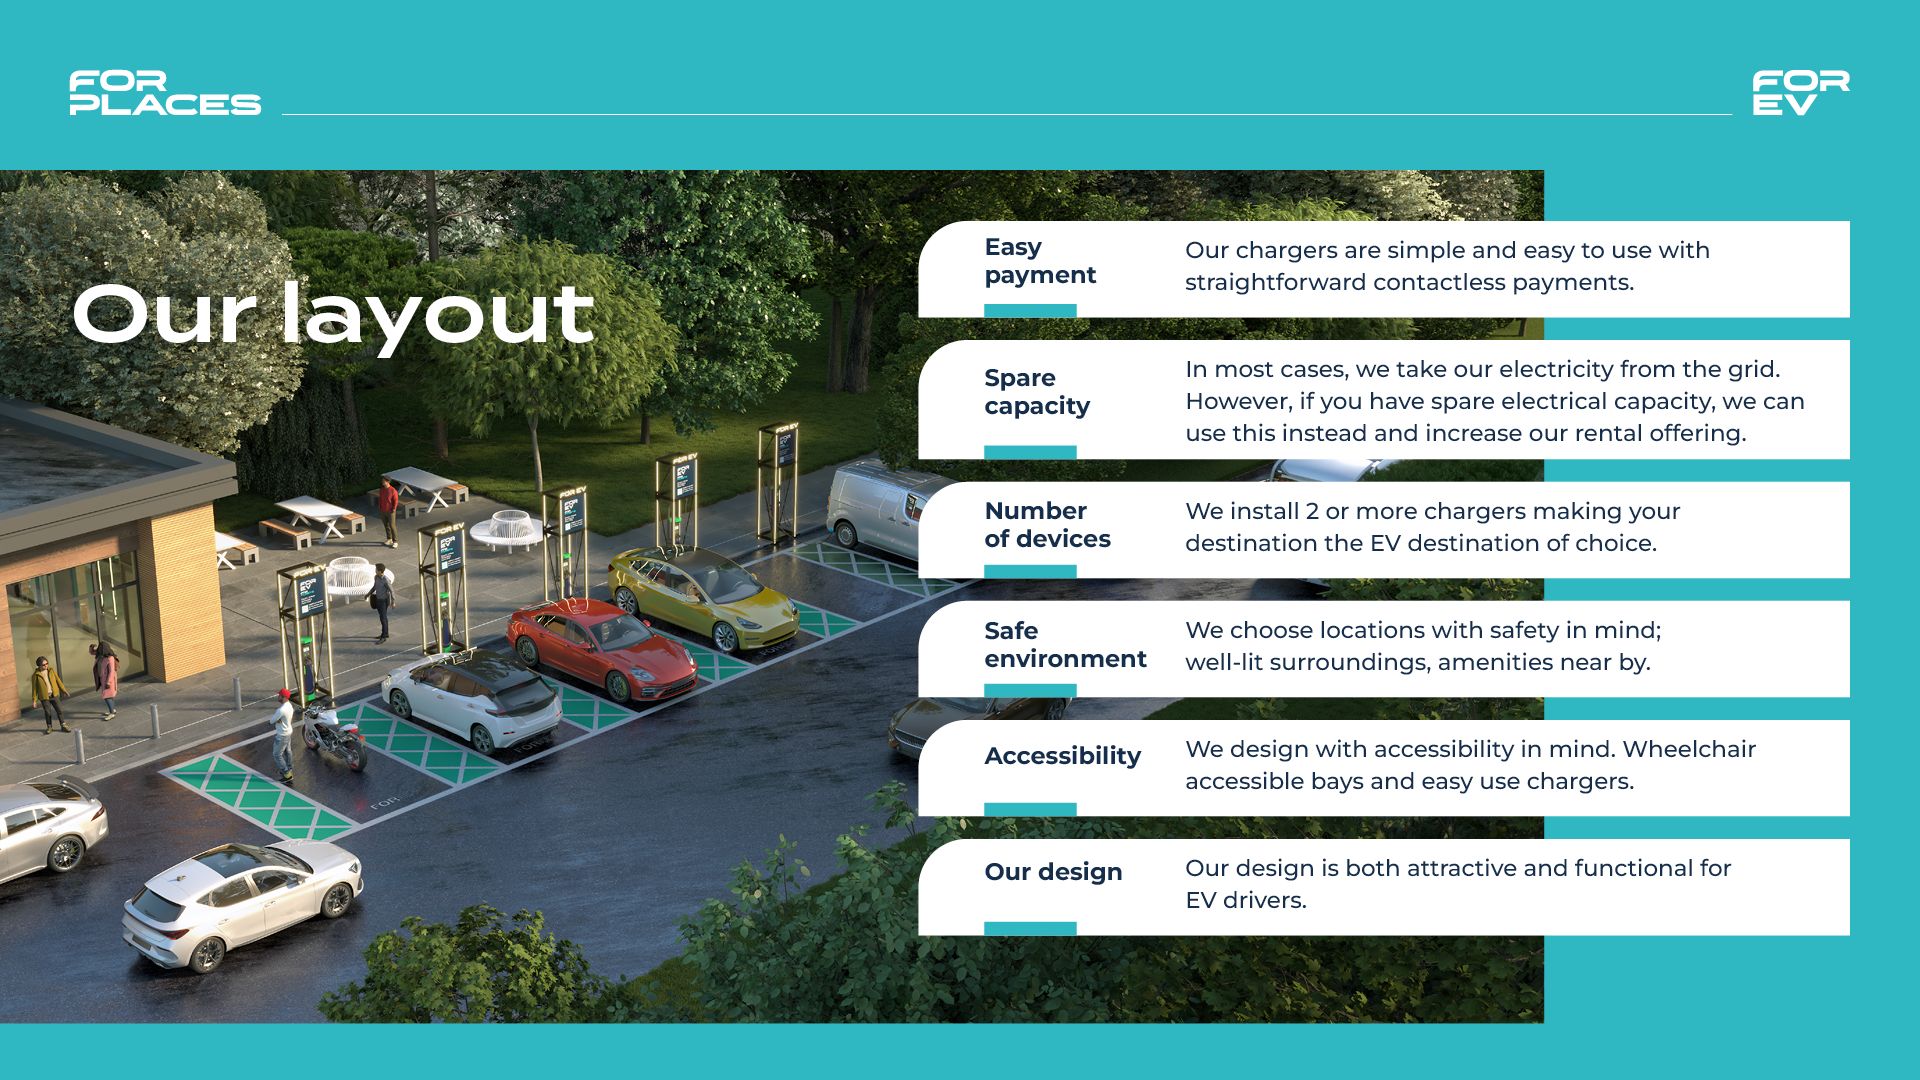 FOR Places – Enjoy long-term revenue opportunities by hosting EV charging at your site